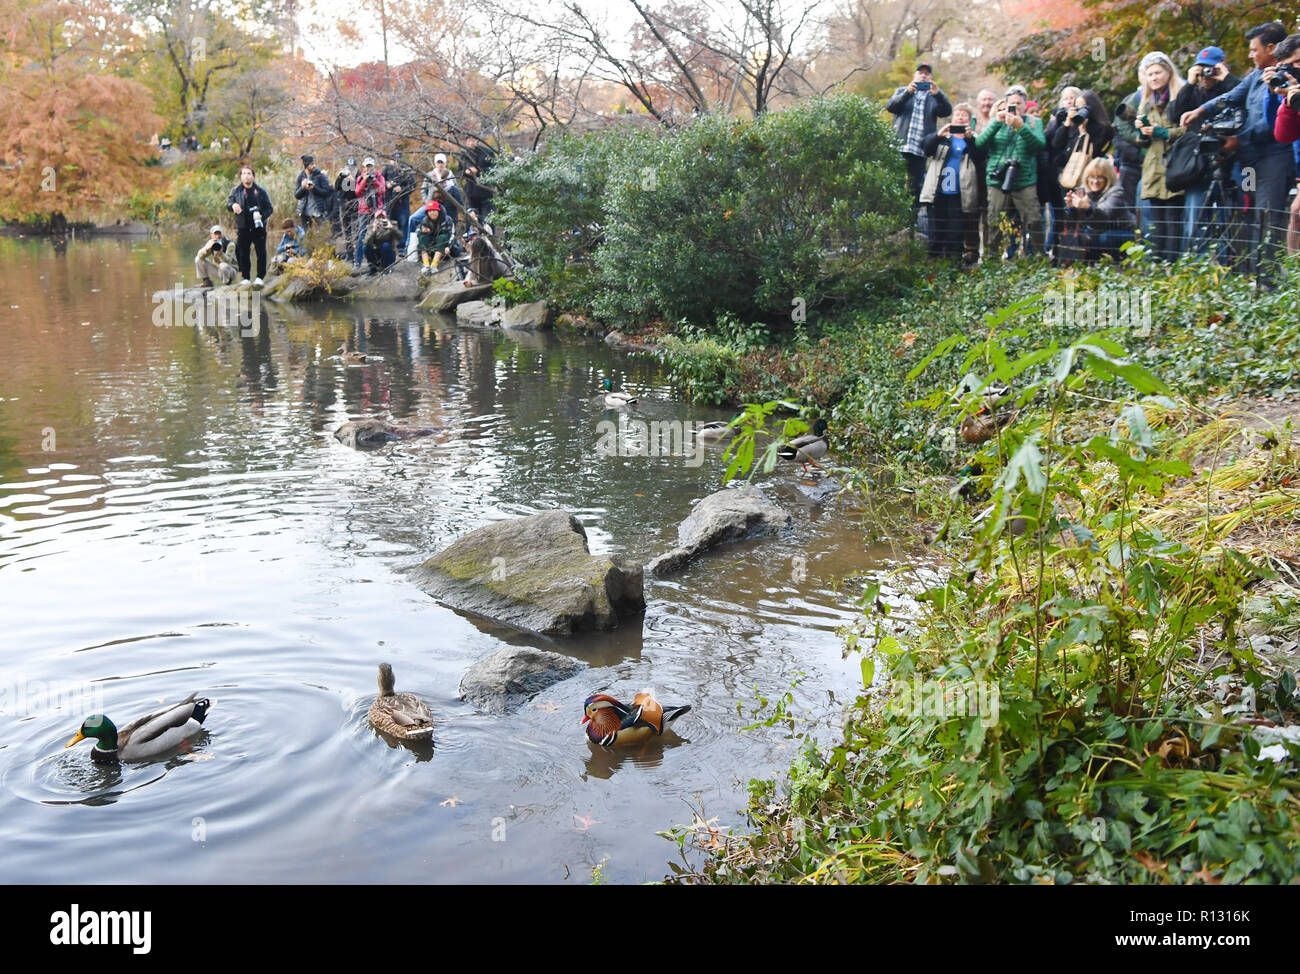 New York, USA. 8th Nov, 2018. People watch and take photos of a Mandarin duck (R) at the Central Park in New York, the United States, on Nov. 8, 2018. Mandarin ducks are native to East Asia and renowned for their dazzling multicolored feathers. This rare Mandarin duck, first spotted in early October, has become a new star at the Central Park, one of New York City's most-visited attractions. Credit: Li Rui/Xinhua/Alamy Live News Stock Photo